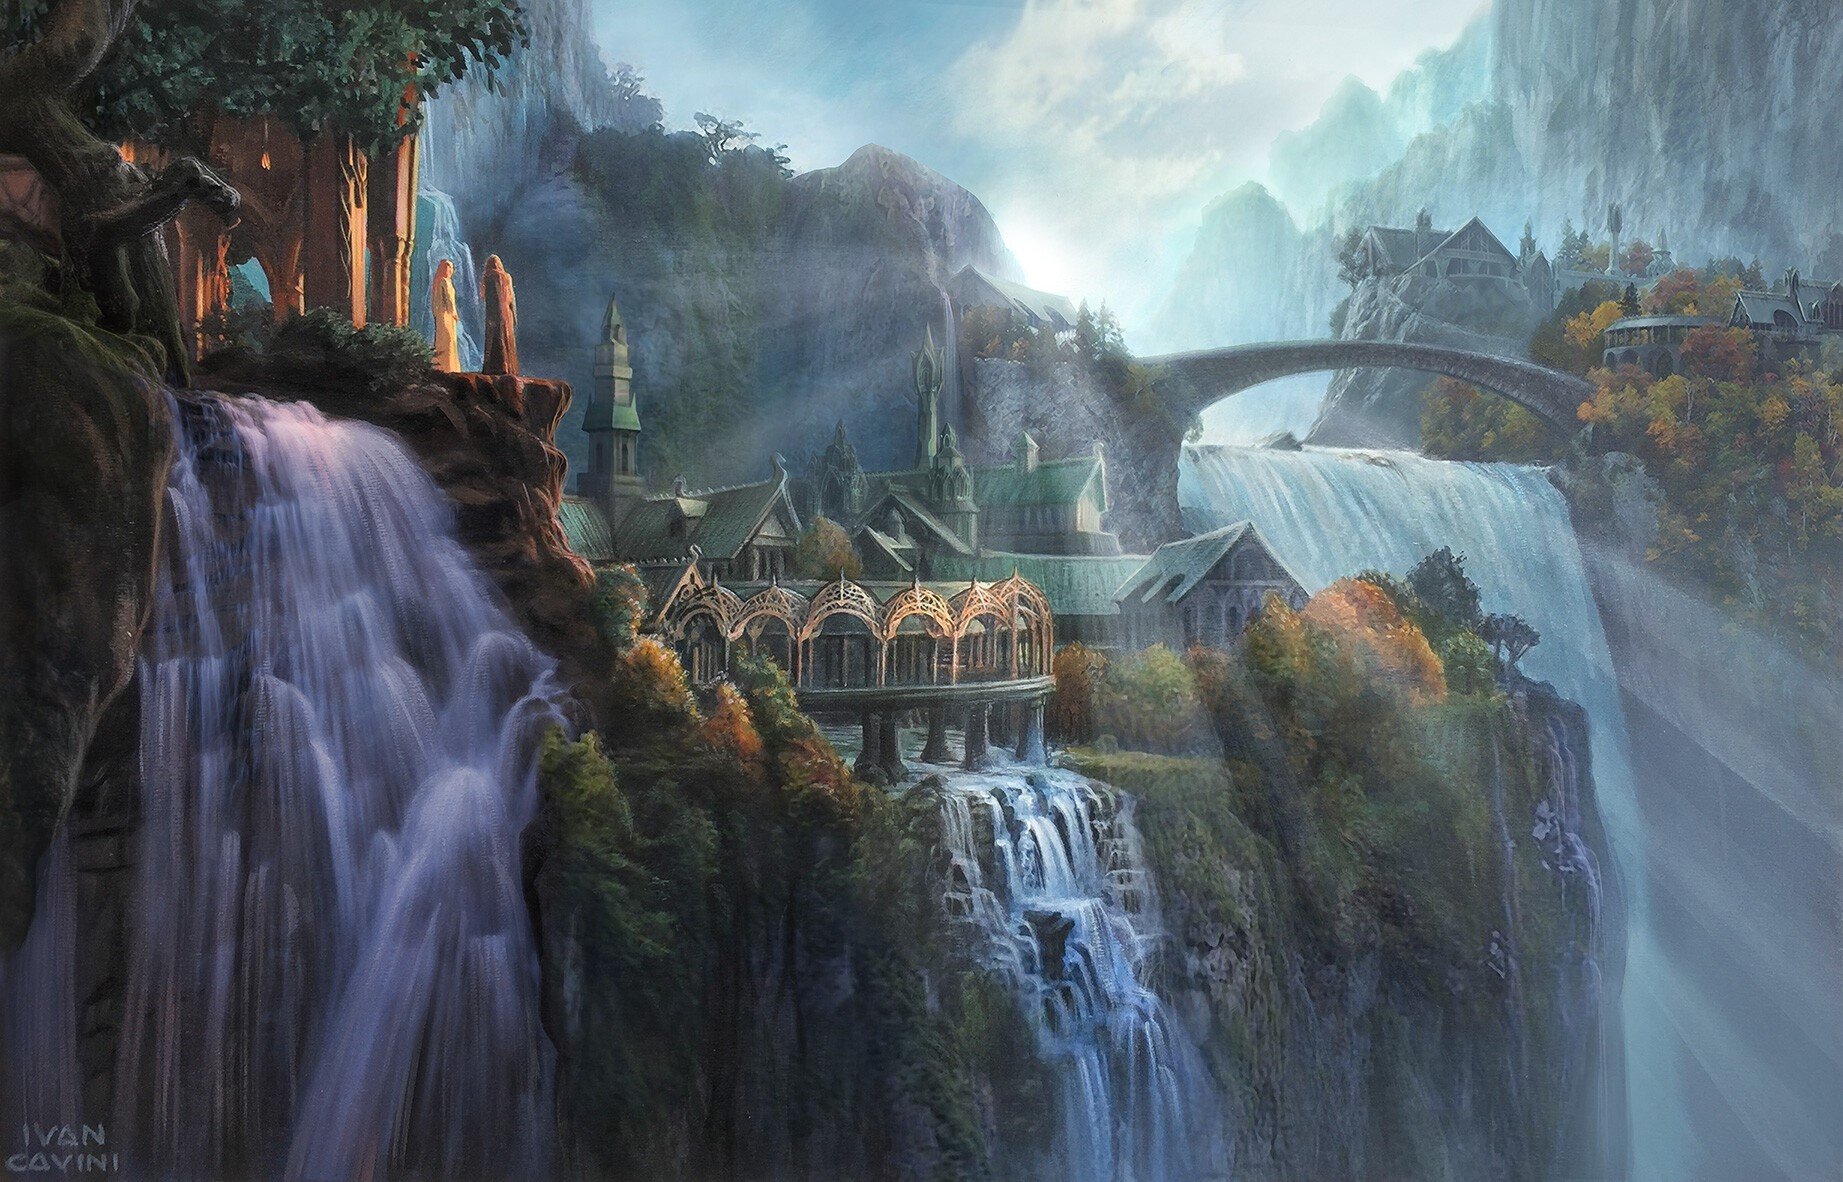 The Lord of the Rings, Rivendell, Ivan Cavini, artwork Gallery HD Wallpaper